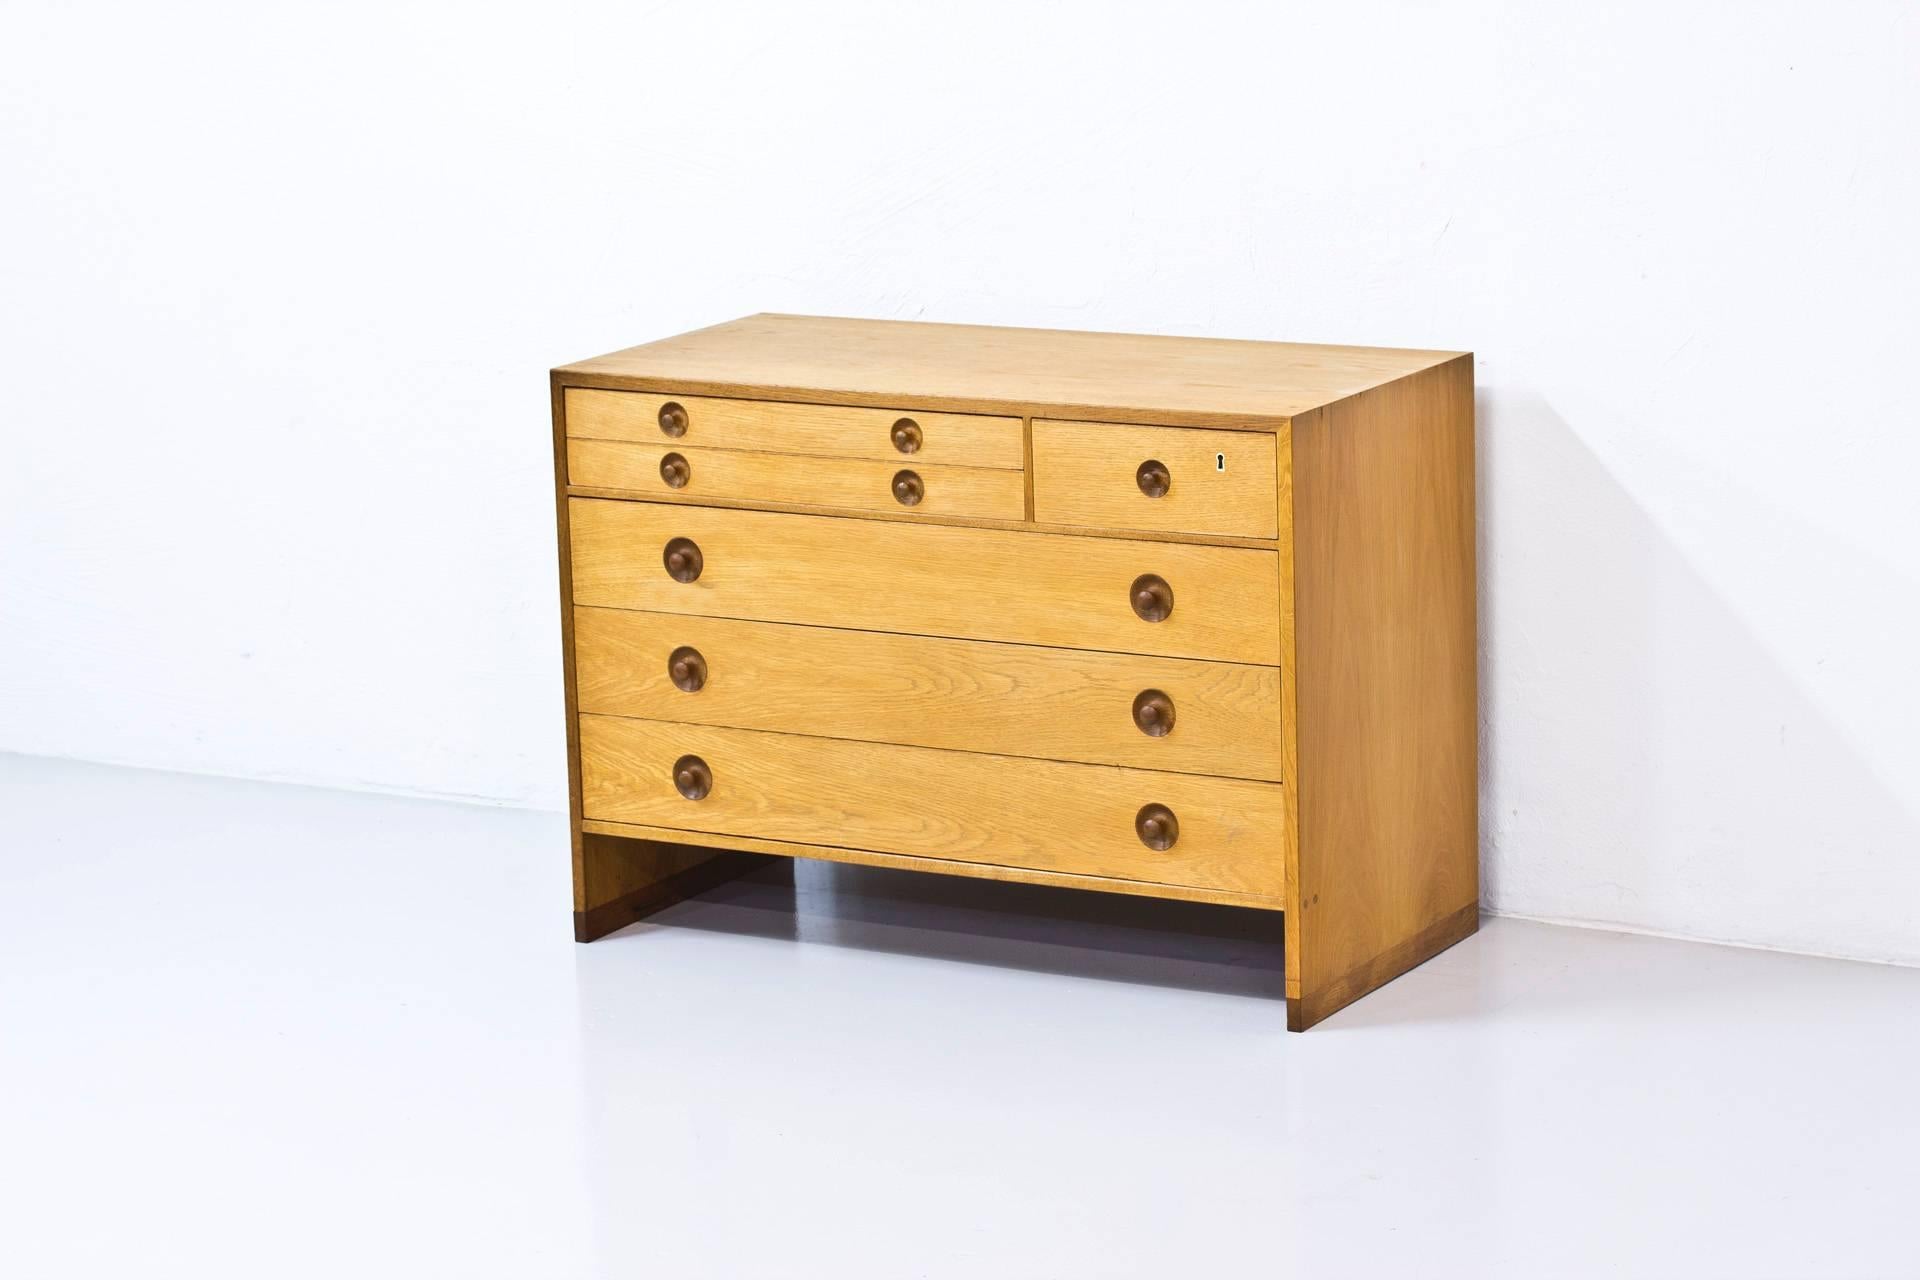 Chest of drawers designed by Hans J. Wegner. Produced in Denmark by Ry Mobler during the 1960s. Made from oak with handles and runners in red oak. Top right drawer with lock and key. The two top left drawers with green felt fabric on the inside.